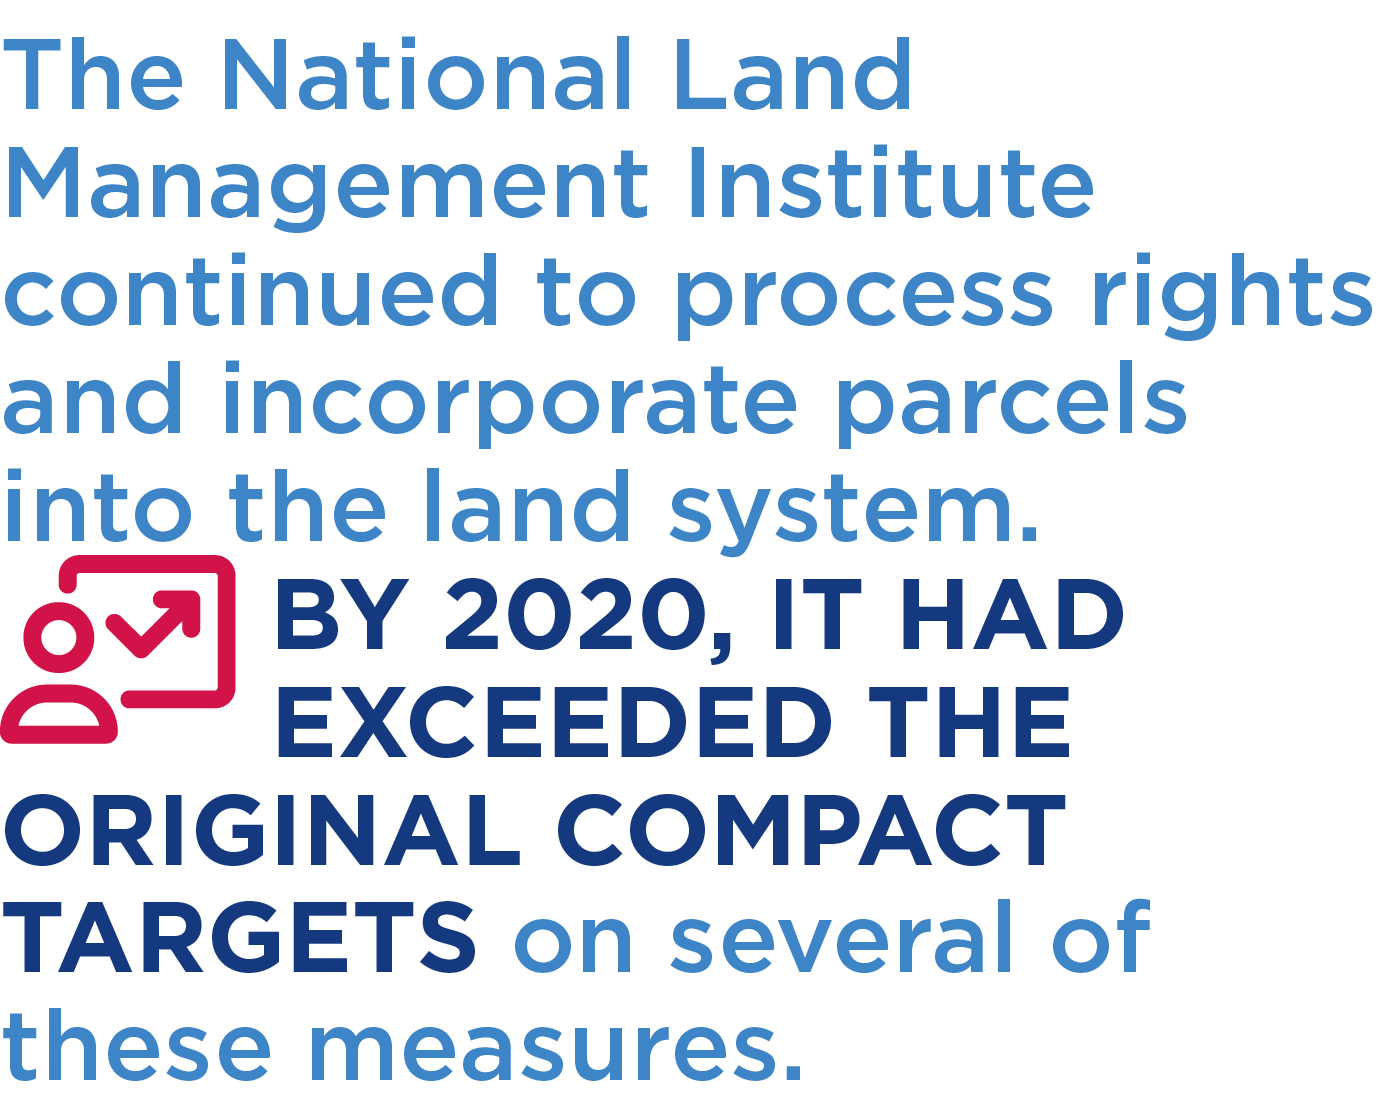 The National Land Management Institute continued to process rights and incorporate parcels into the land system. BY 2020, IT HAD EXCEEDED THE ORIGINAL COMPACT TARGETS on several of these measures.